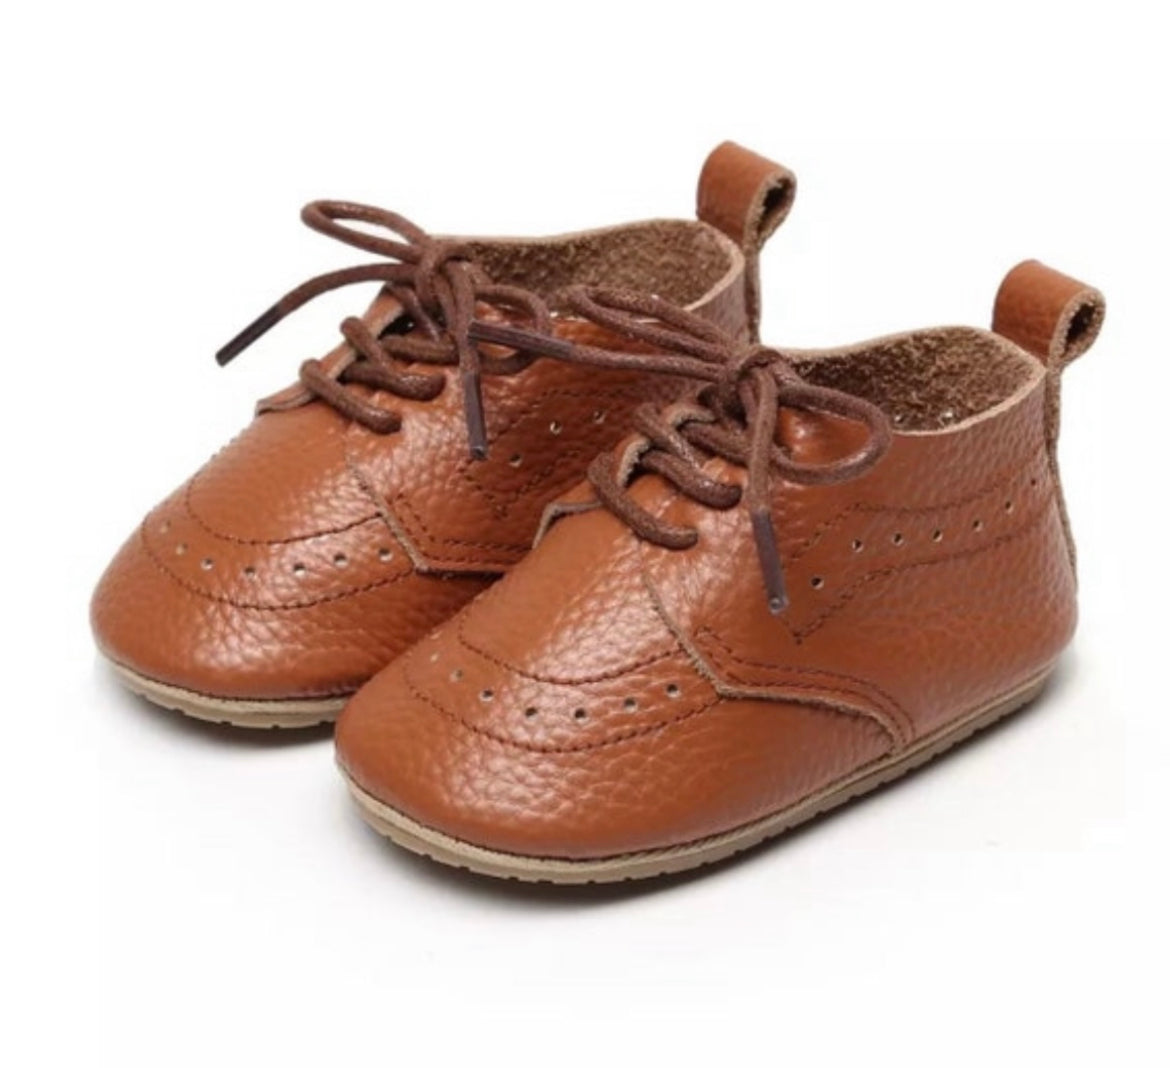 Baby Oxford Brogues - Handmade Genuine Leather Baby Shoes, Tan.